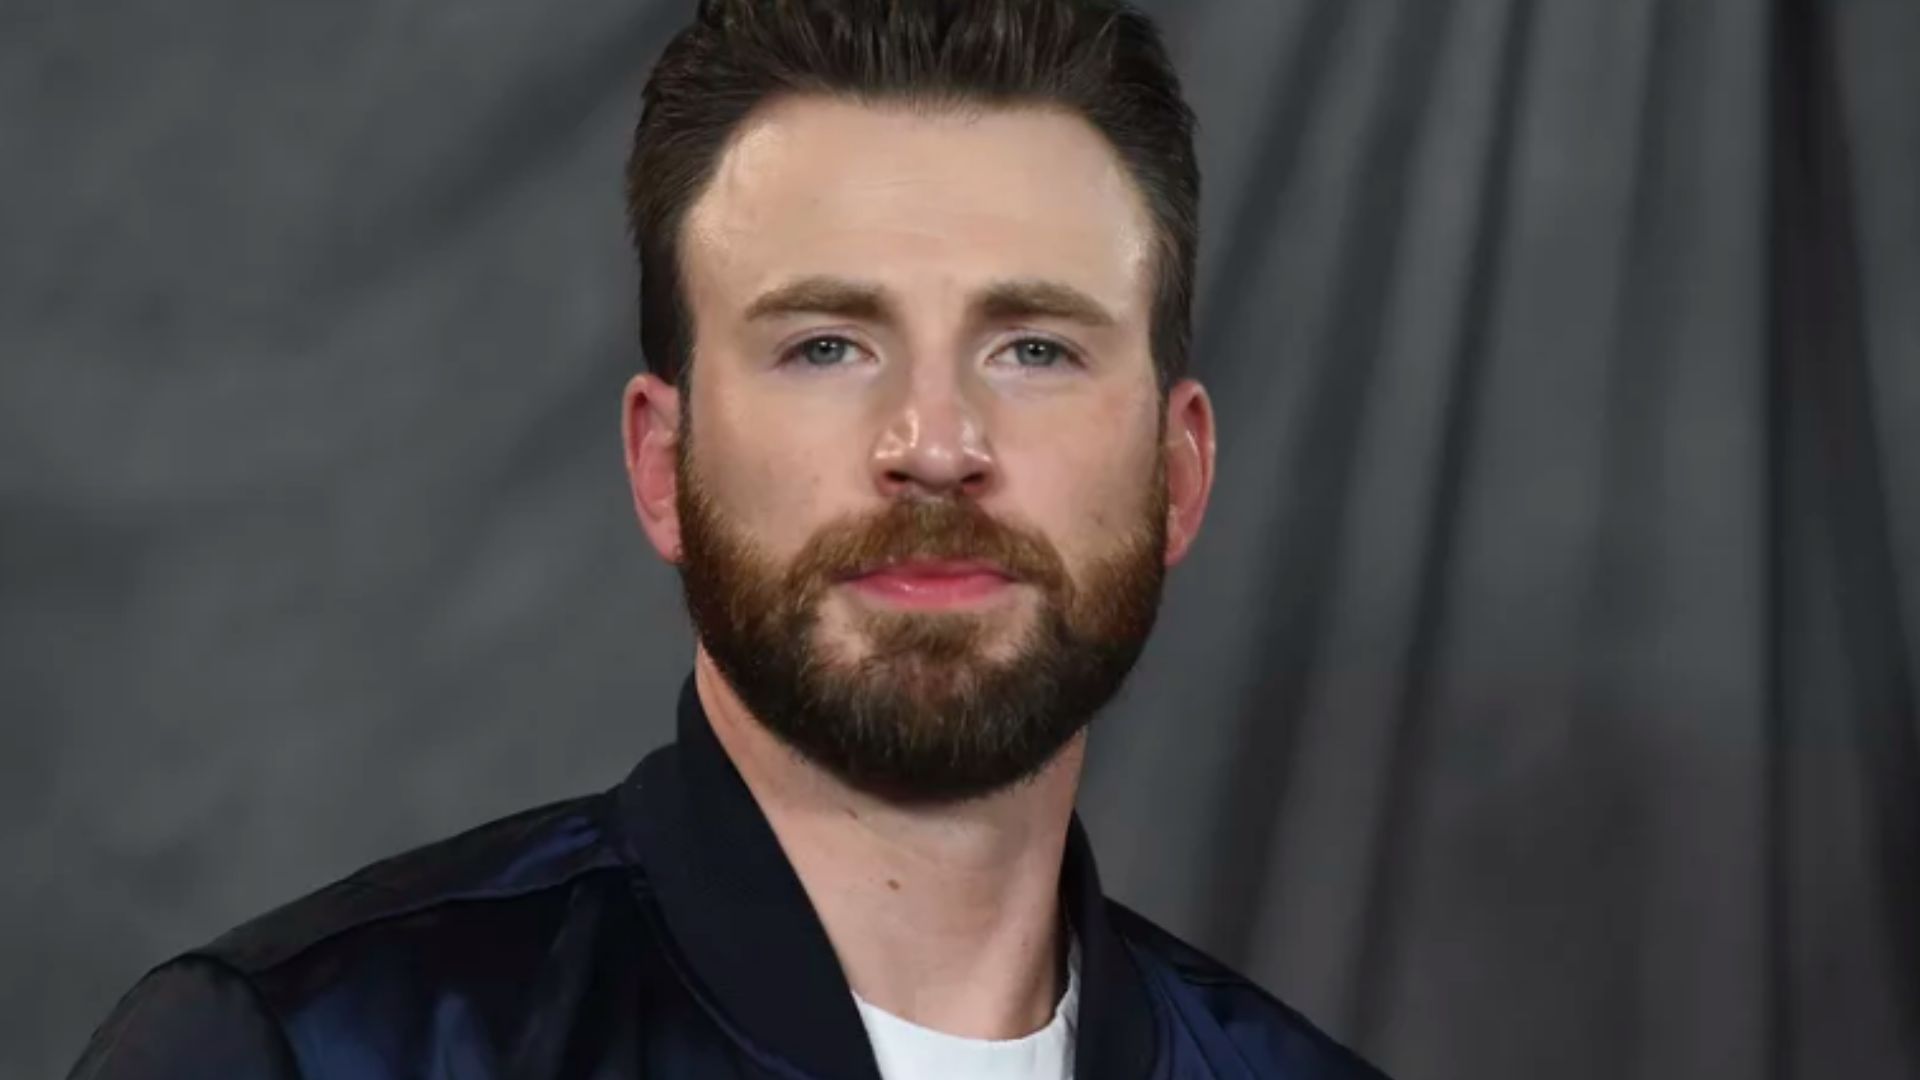 Chris Evans quoted Sexiest Man Alive by People magazine